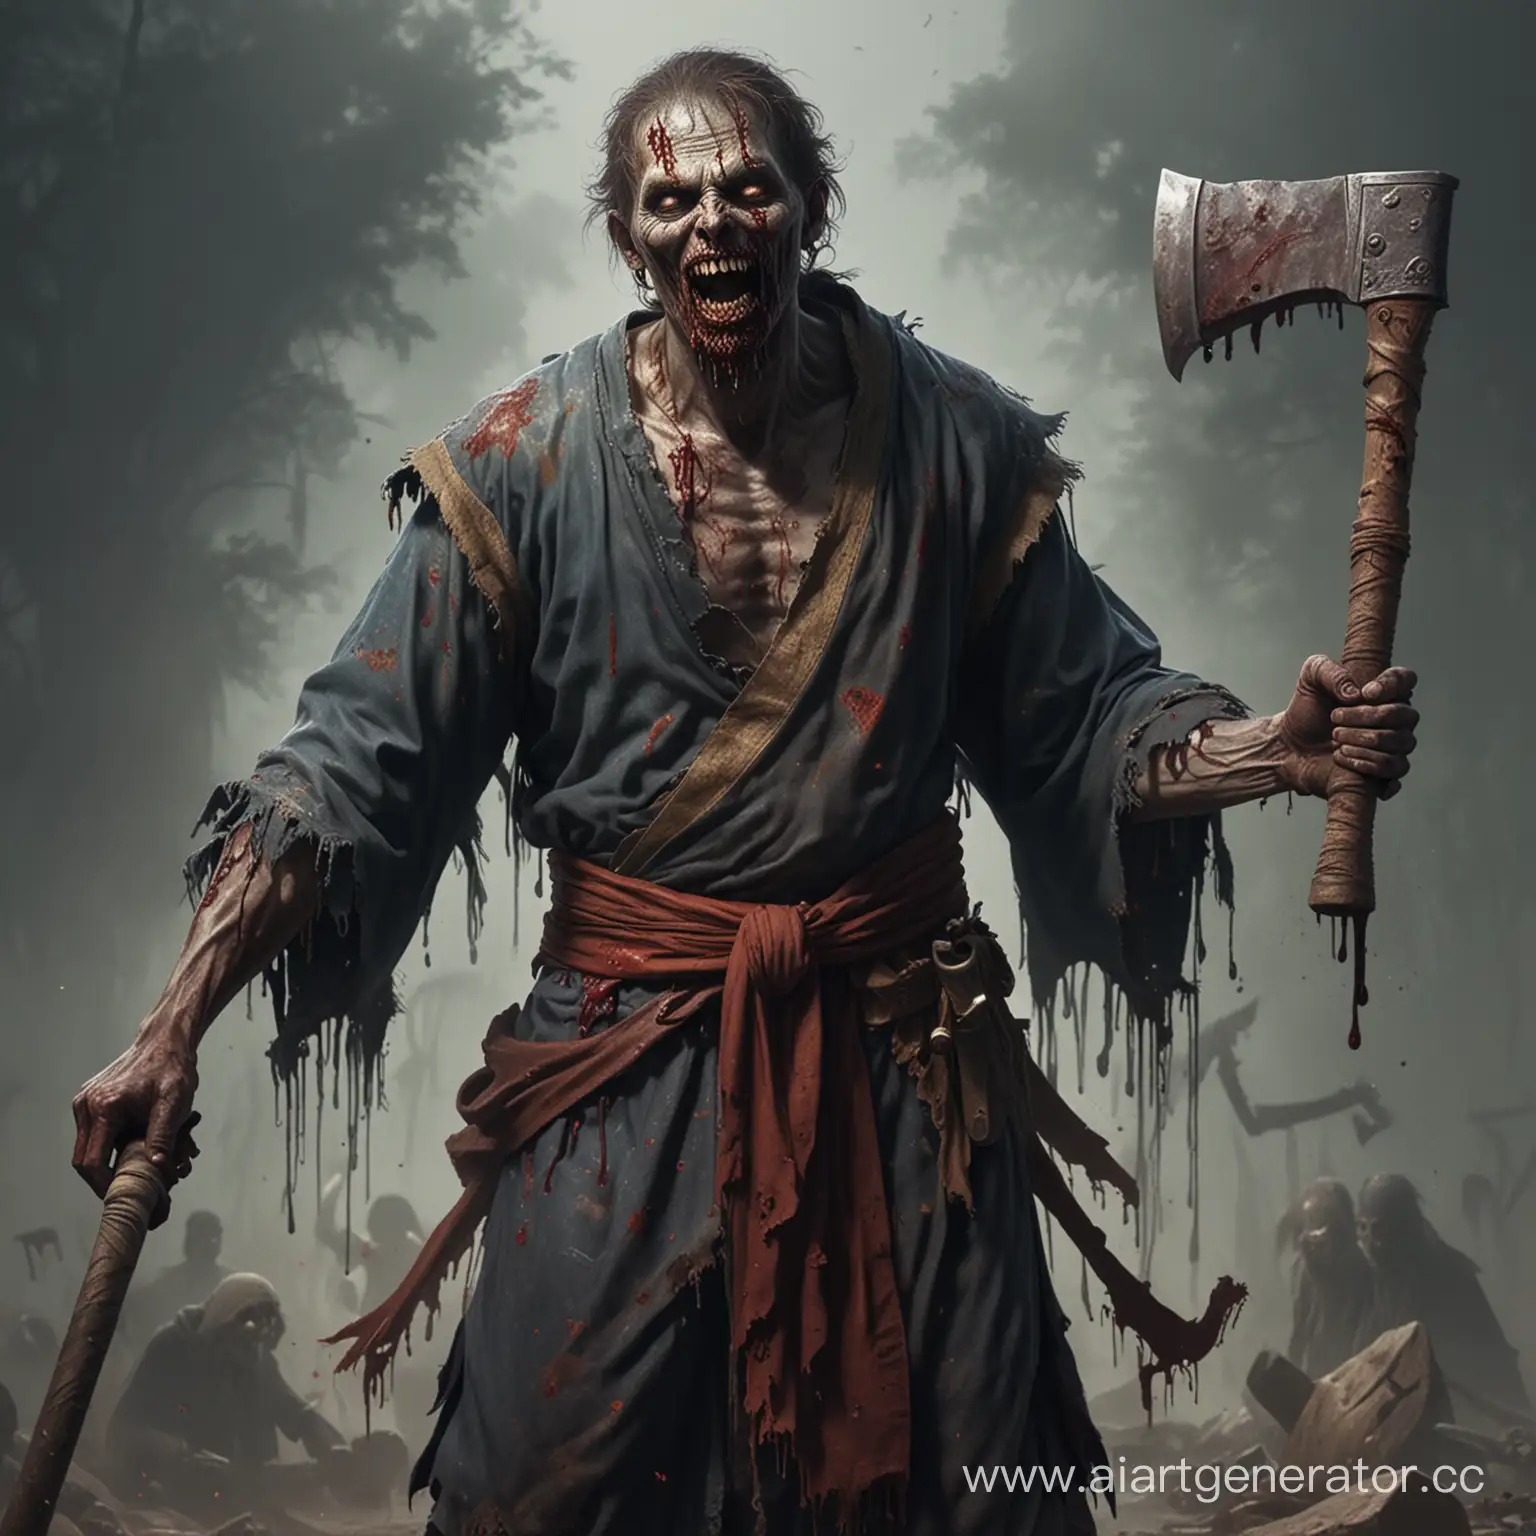 Ancient-Zombie-With-Axe-Dressed-in-Historical-Clothing-and-Bleeding-Eyeless-Smile